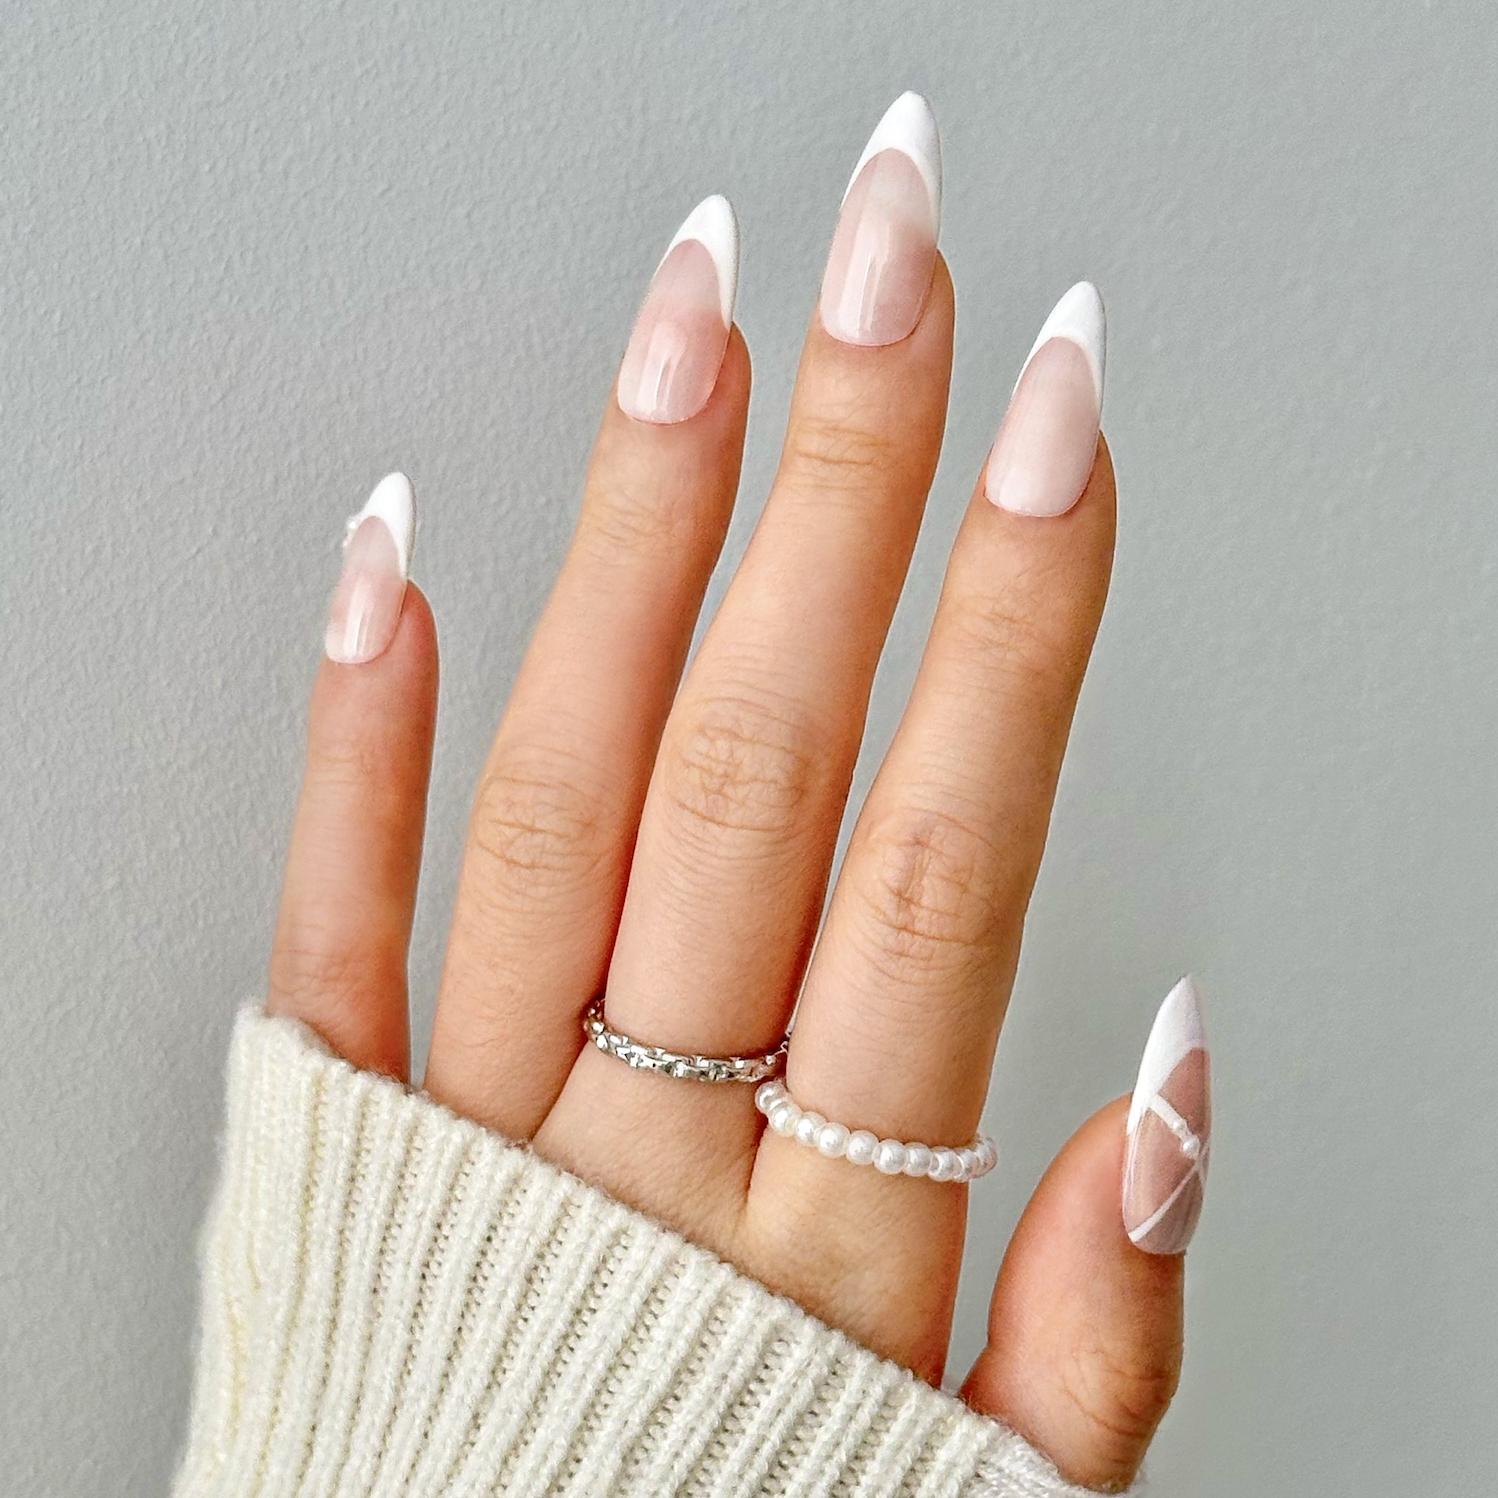 Close-up of a hand wearing MyLilith's French tip Ballerina press-on nails with an almond shape and one accent nail featuring a geometric design.